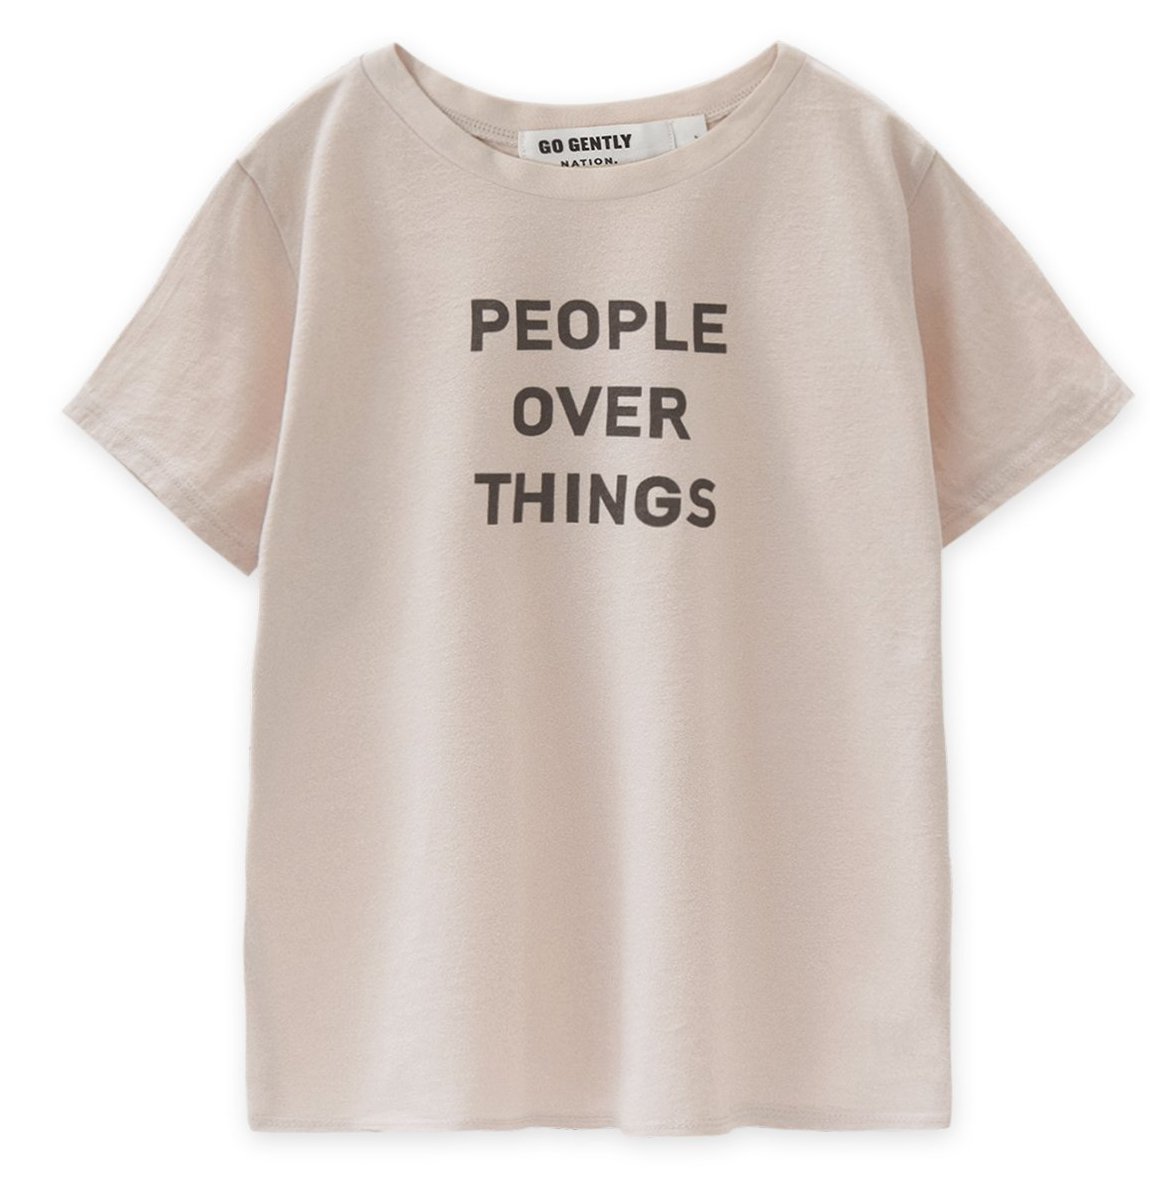 Go Gently Nation People Over Things Tee Shirt